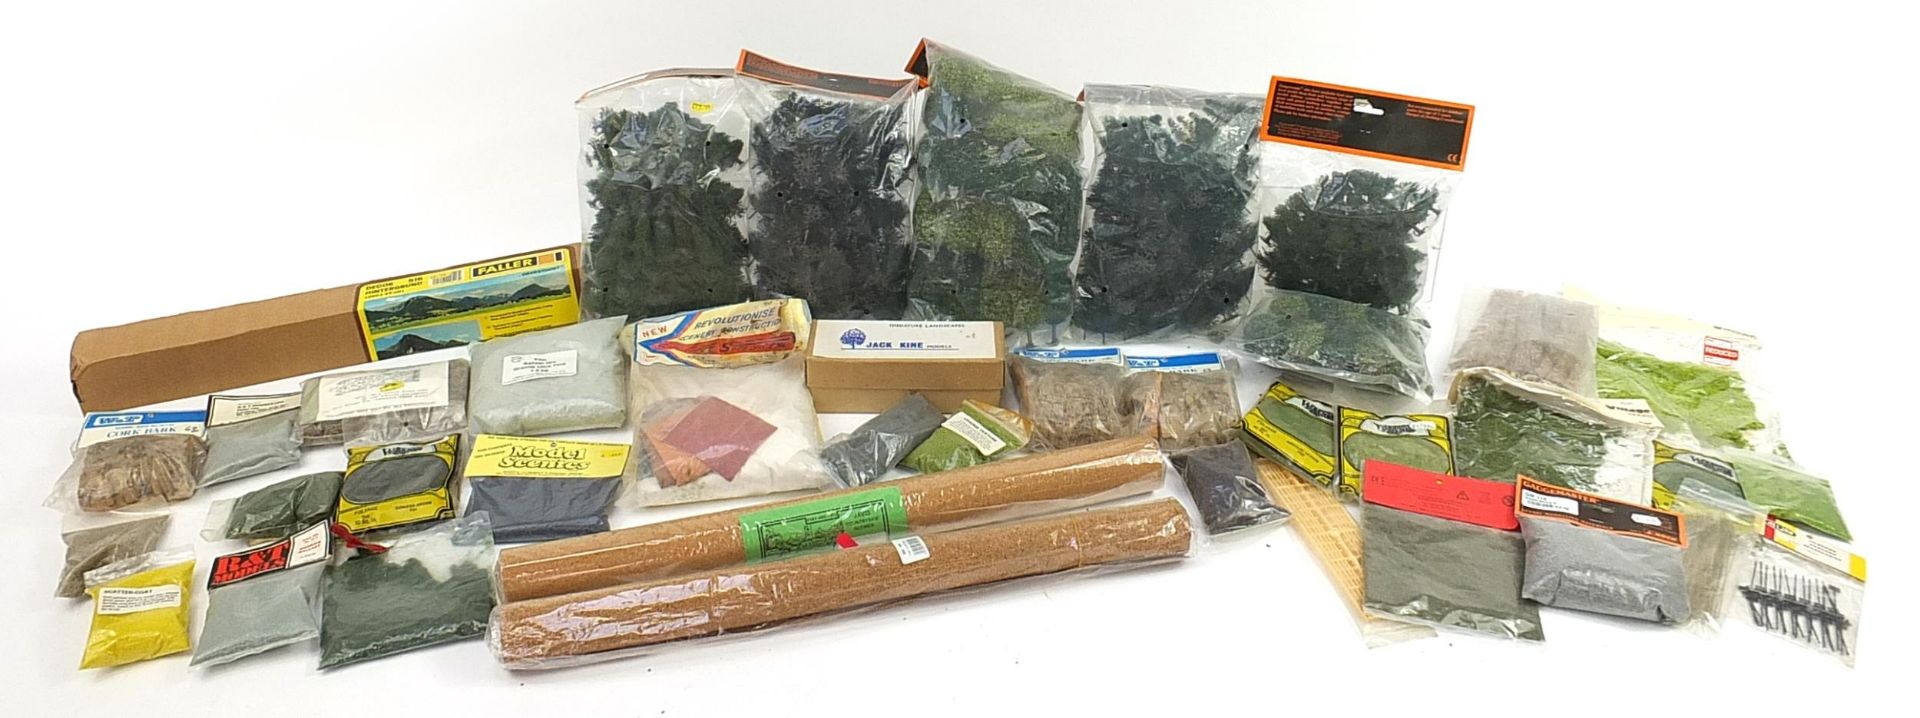 Model railway landscape accessories in packets including grass, trees, sand and cork